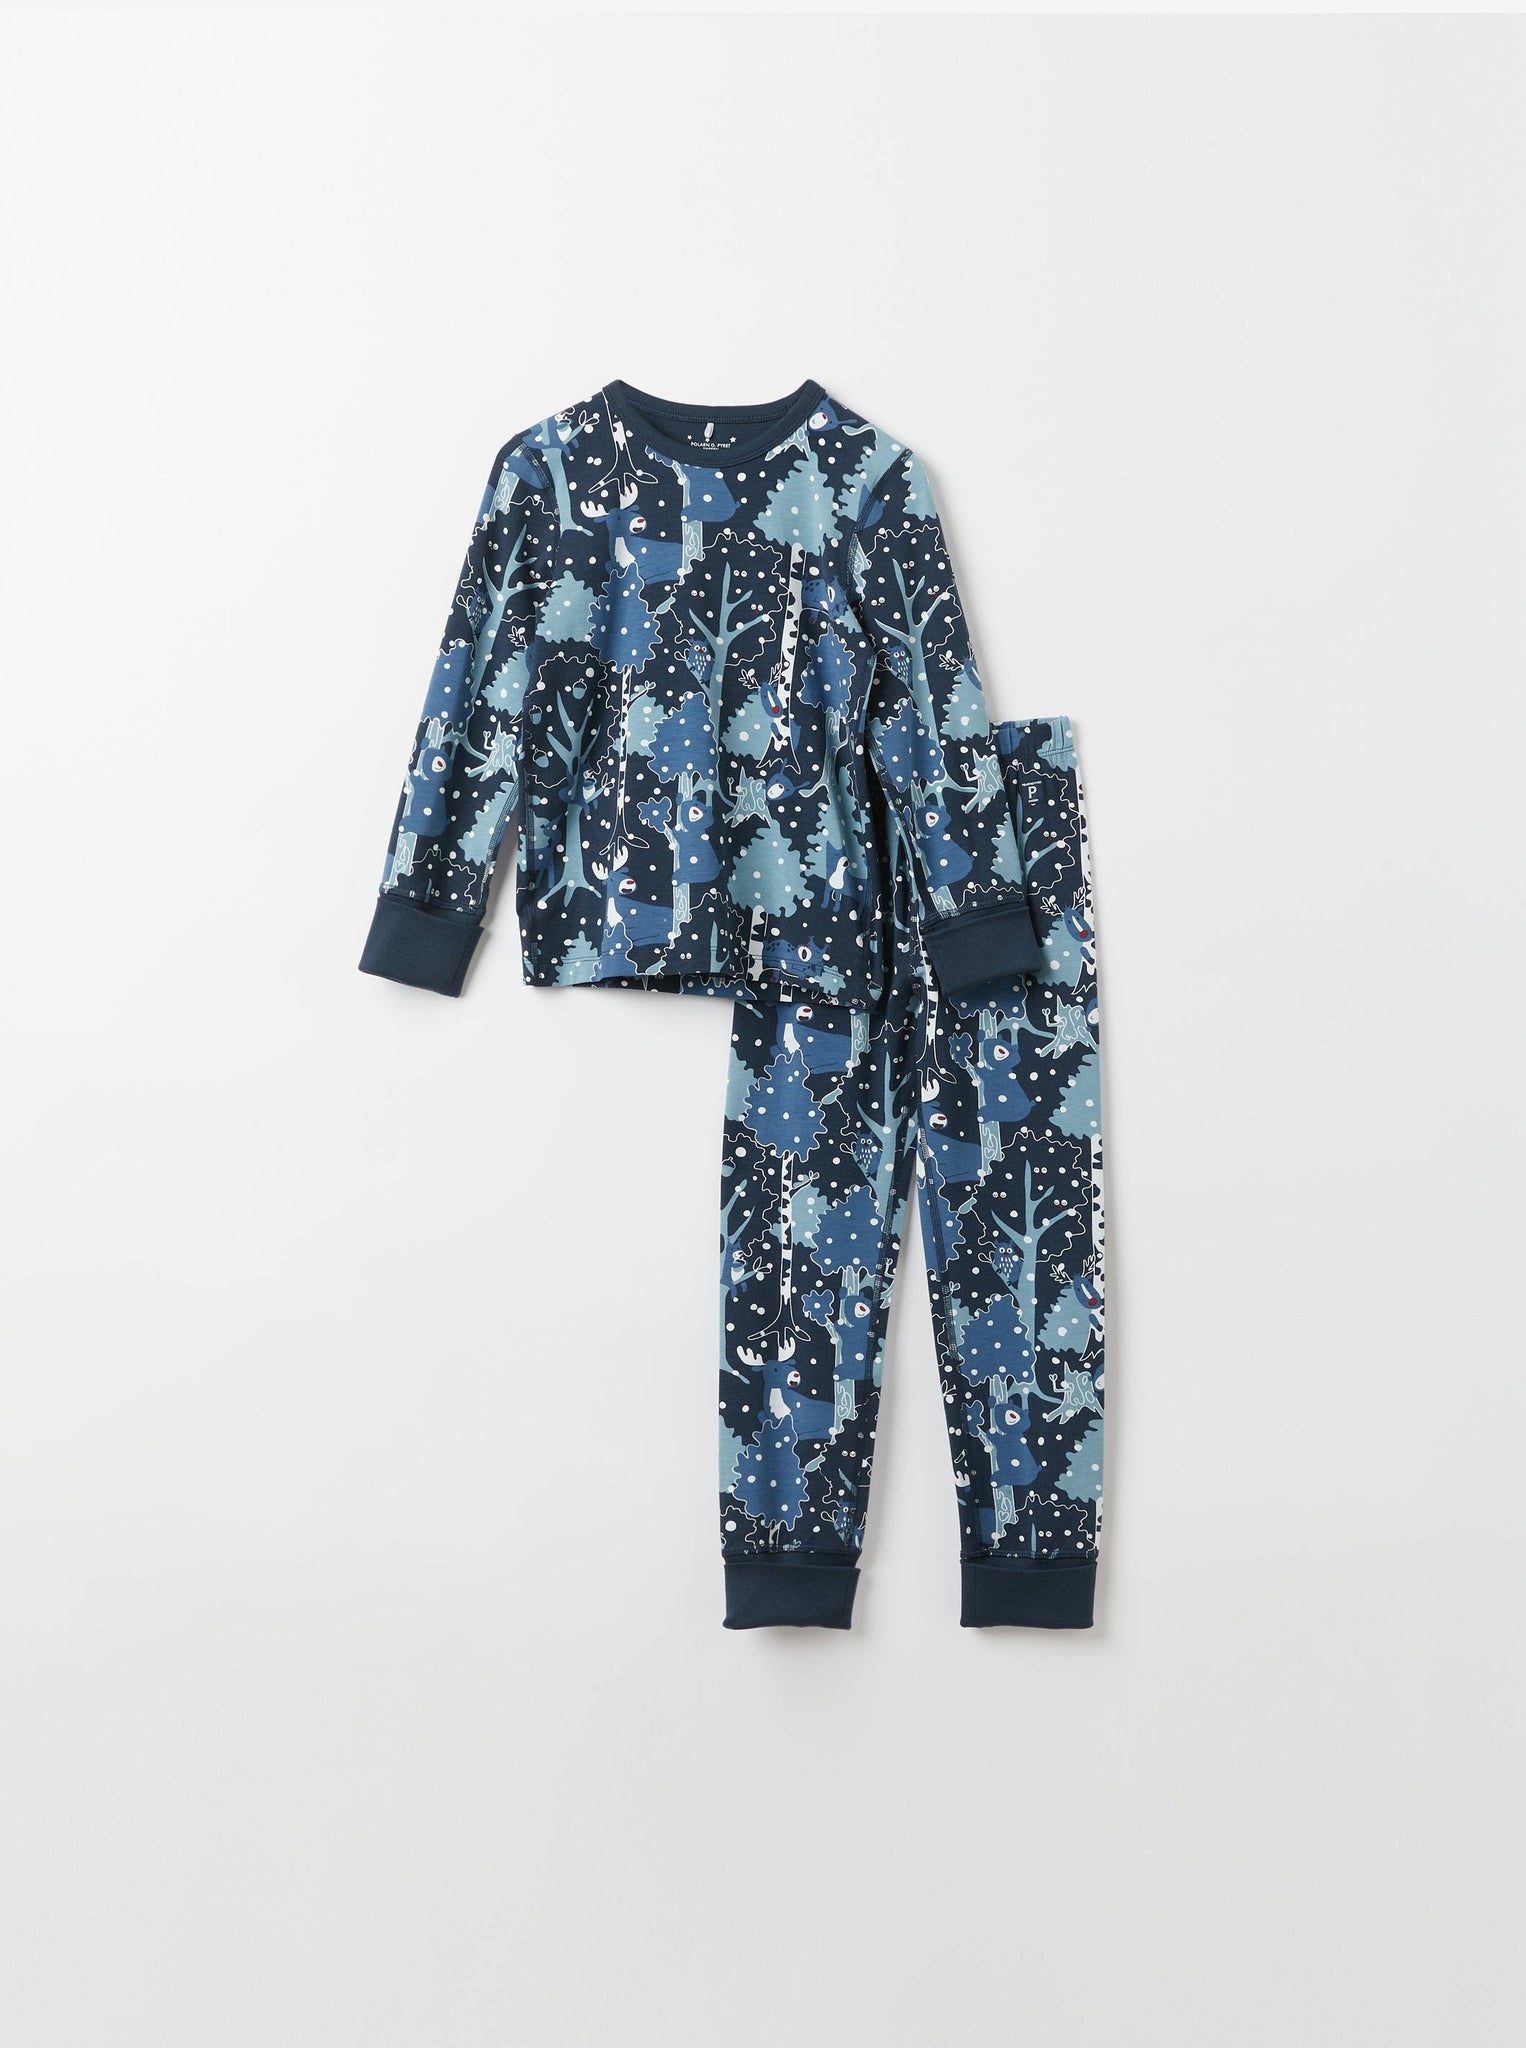 Organic Cotton Nordic Kids Pyjamas from the Polarn O. Pyret kidswear collection. Nordic kids clothes made from sustainable sources.